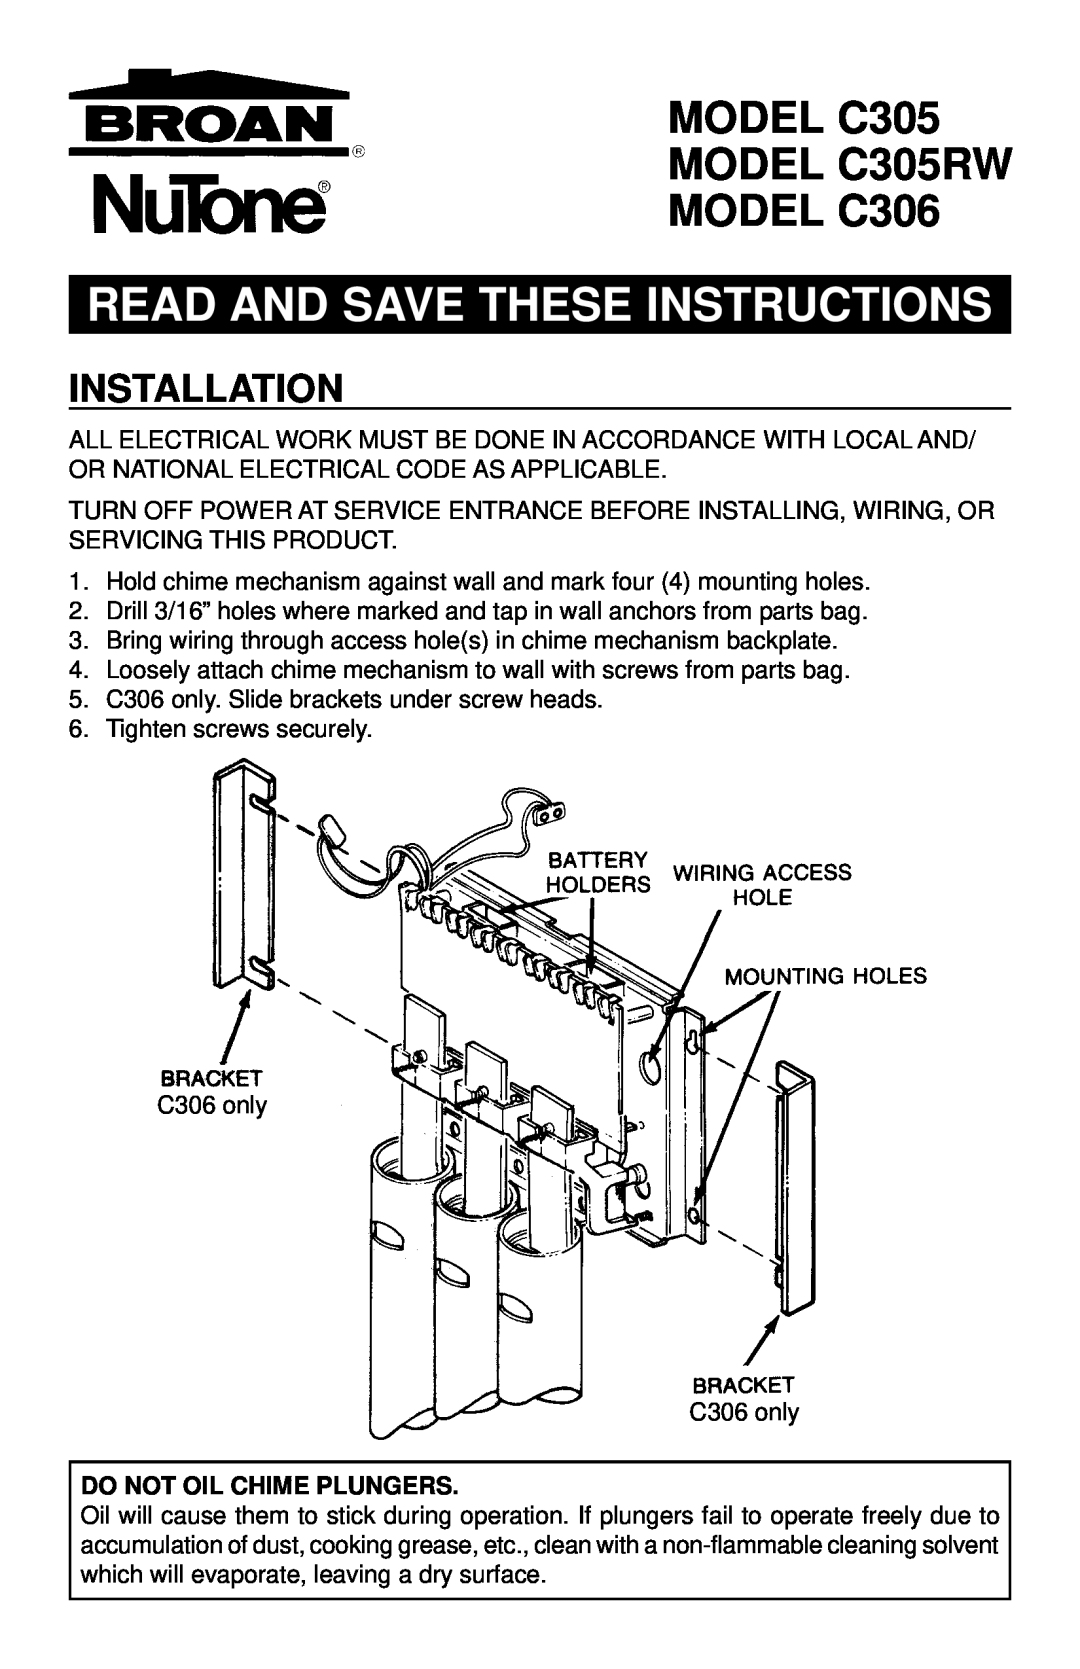 Broan C305RW, C306 manual Installation, Do Not Oil Chime Plungers, Read And Save These Instructions 